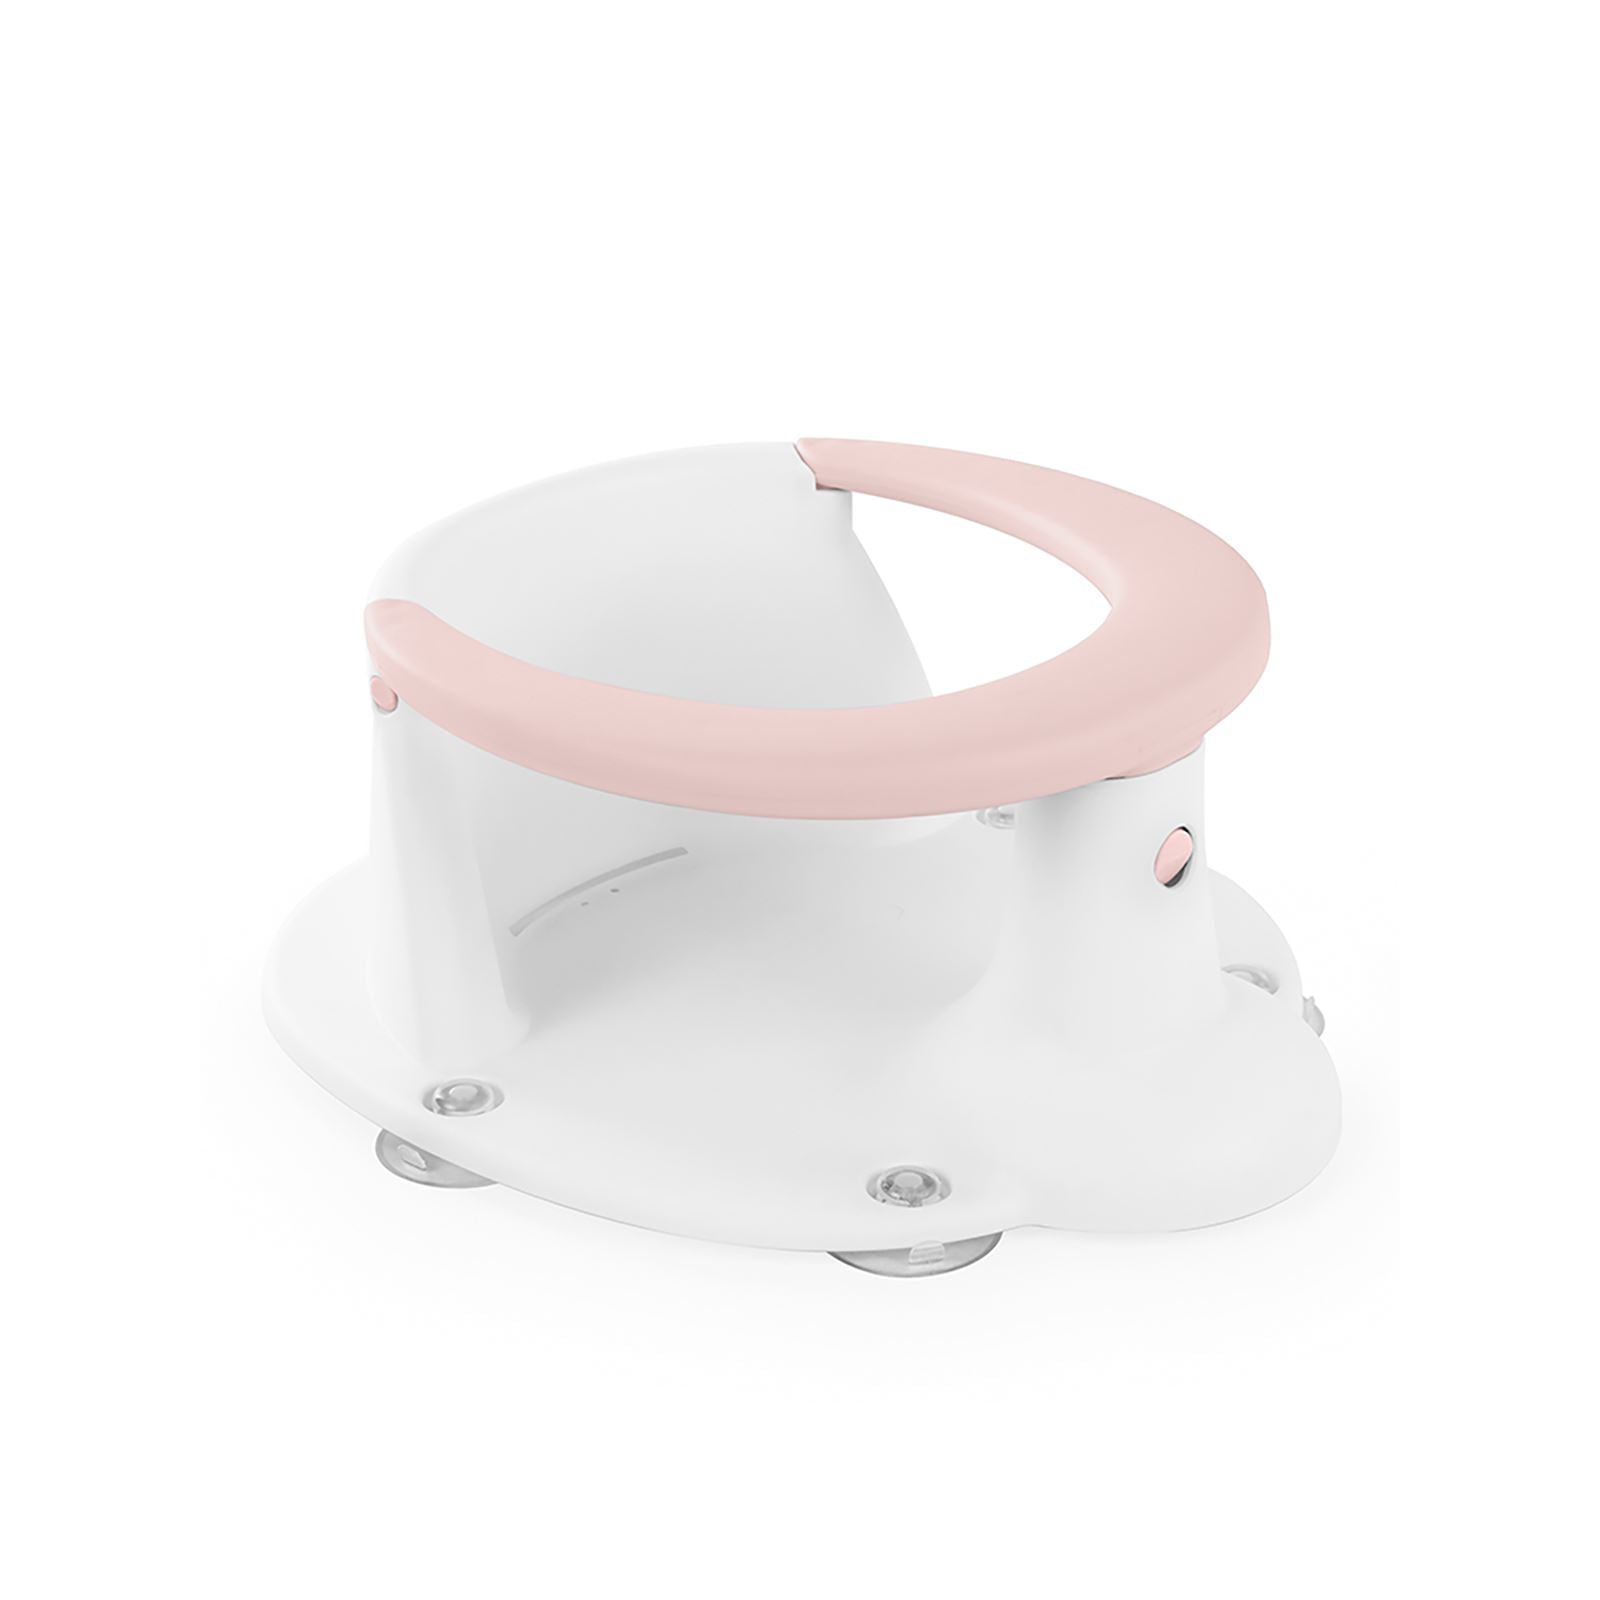 Dolu Baby Bath Seat 7459 with Suction Cup - Bathroom Chair Pink